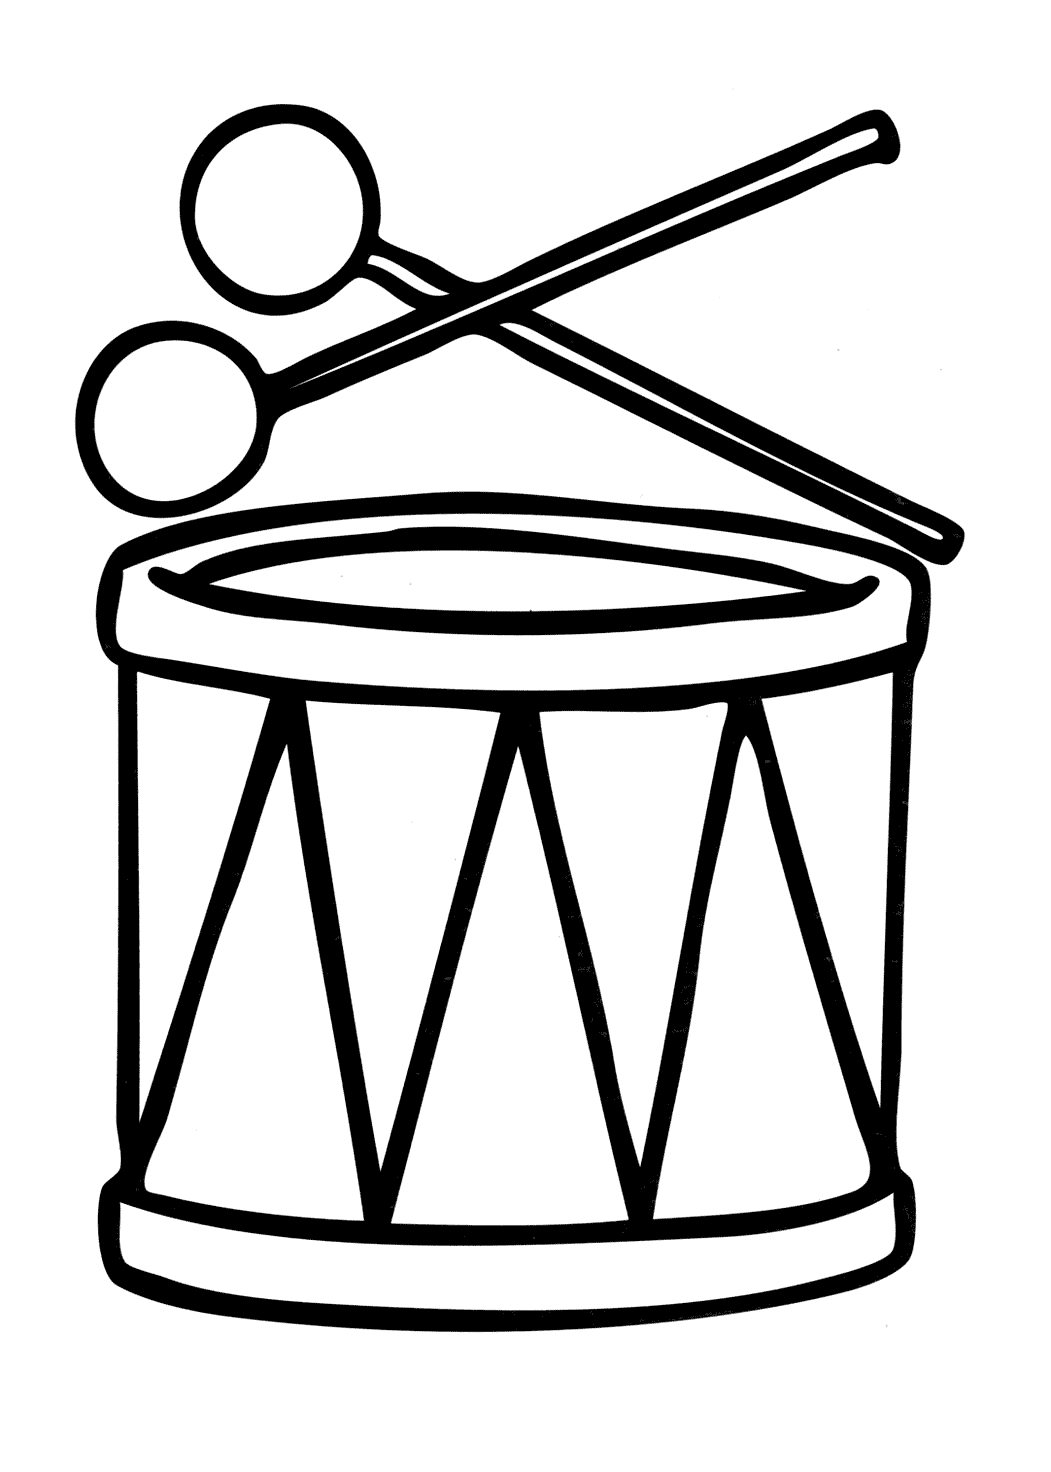 drums coloring page drum 2 coloring page drums page coloring 